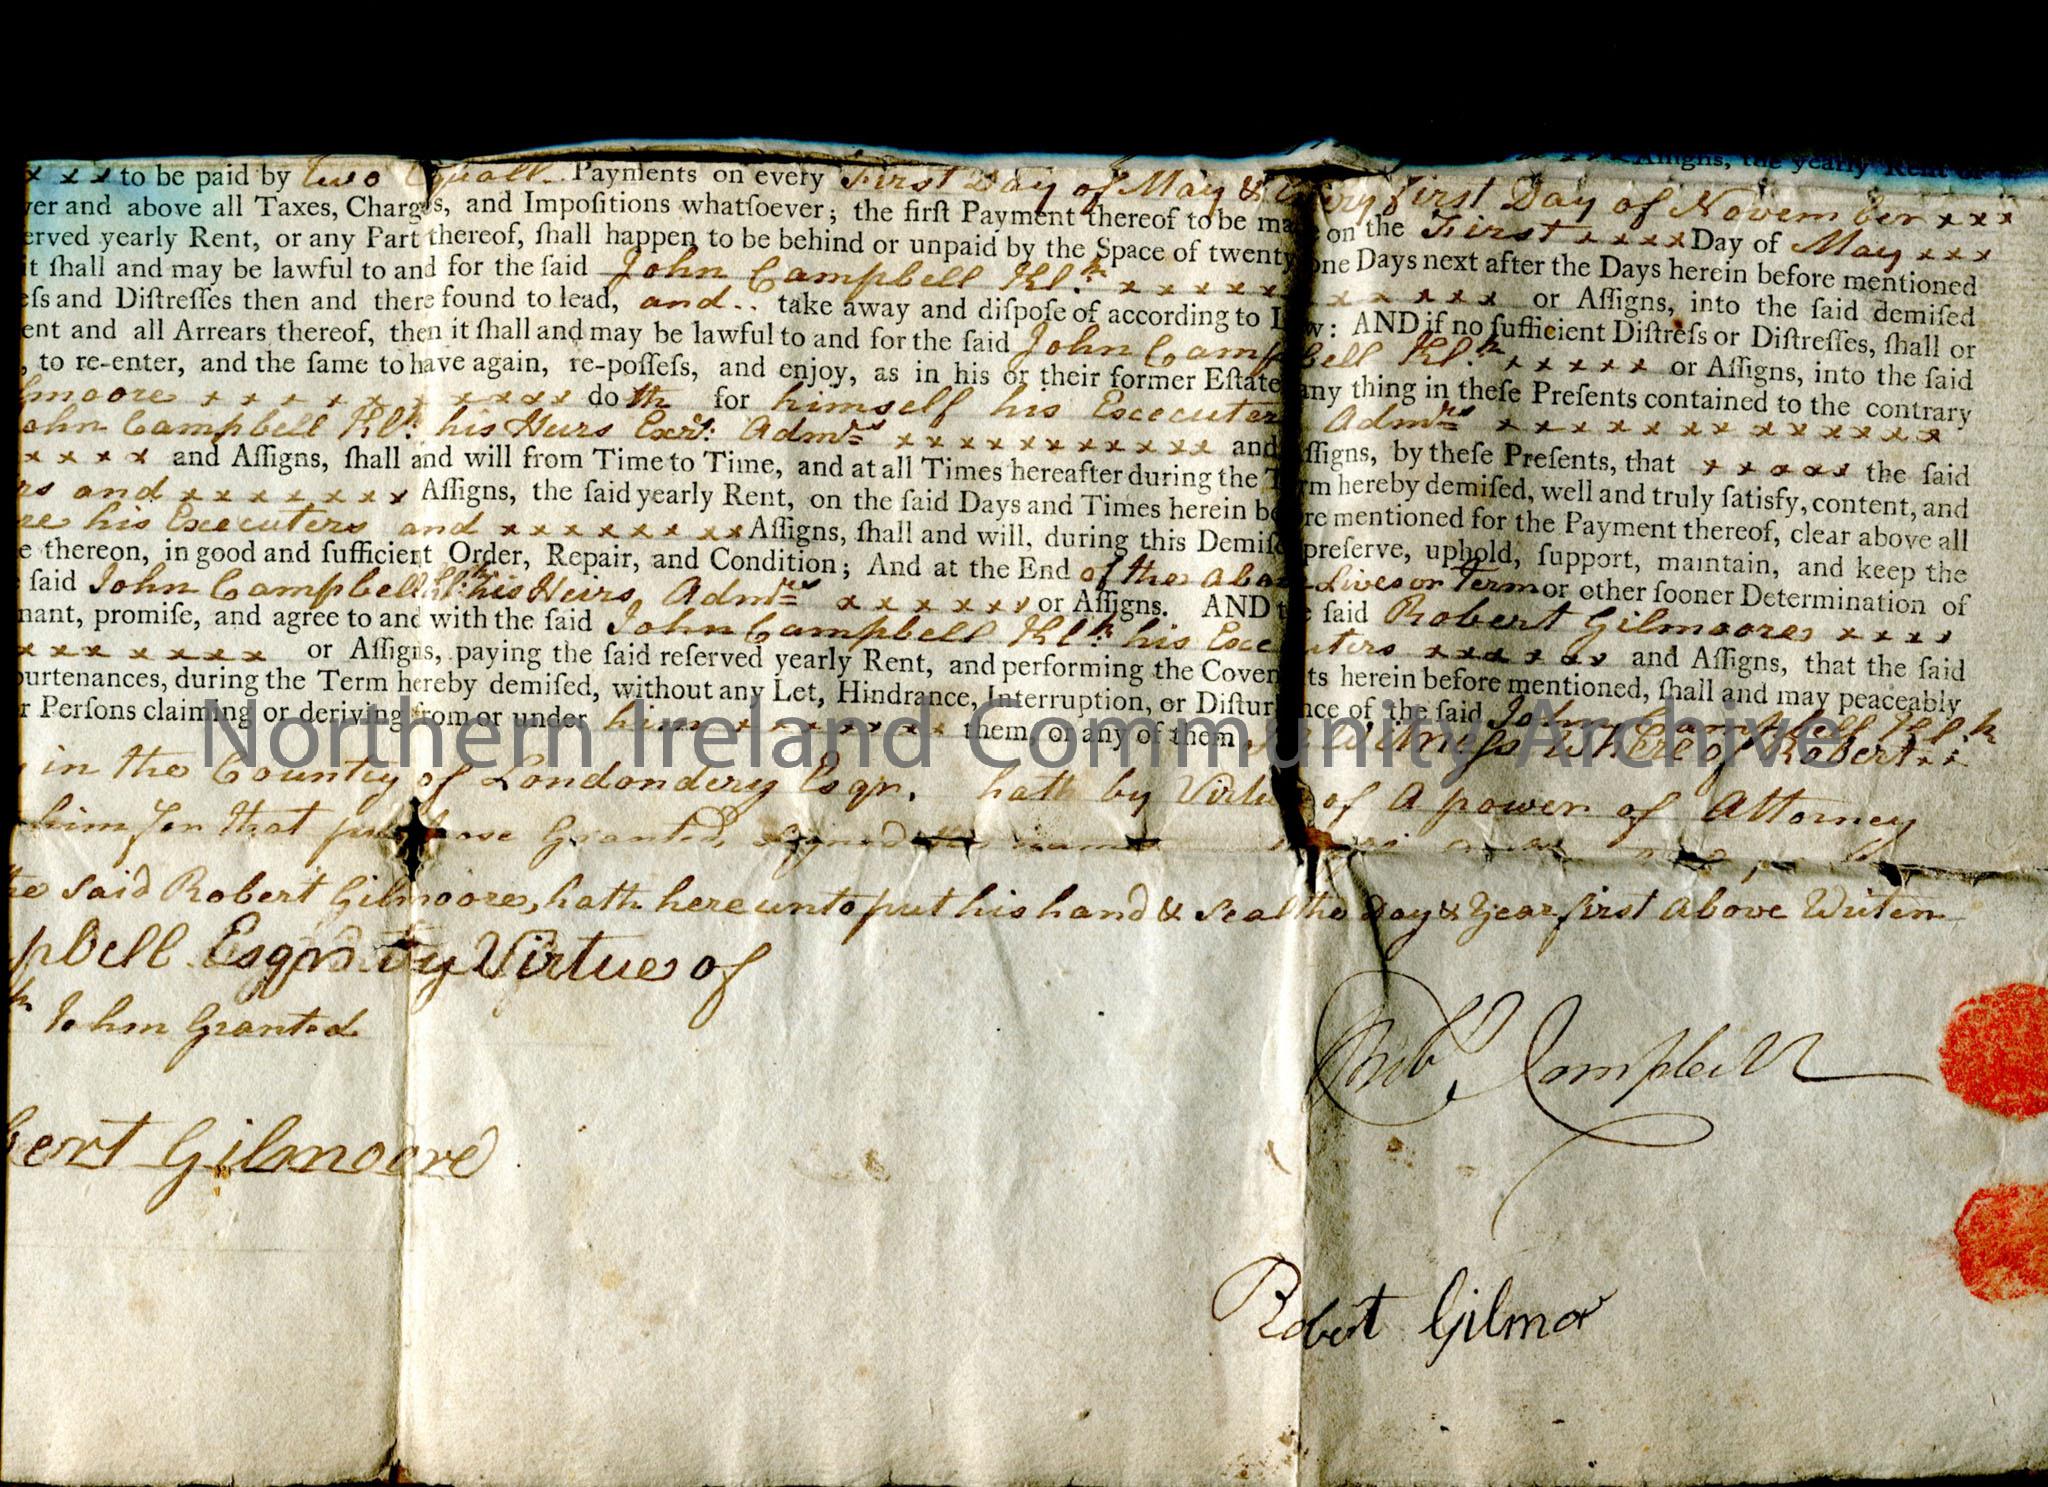 18th century indenture for land rental agreement, with conditions of lease, for land in Ballyvelton – img115d